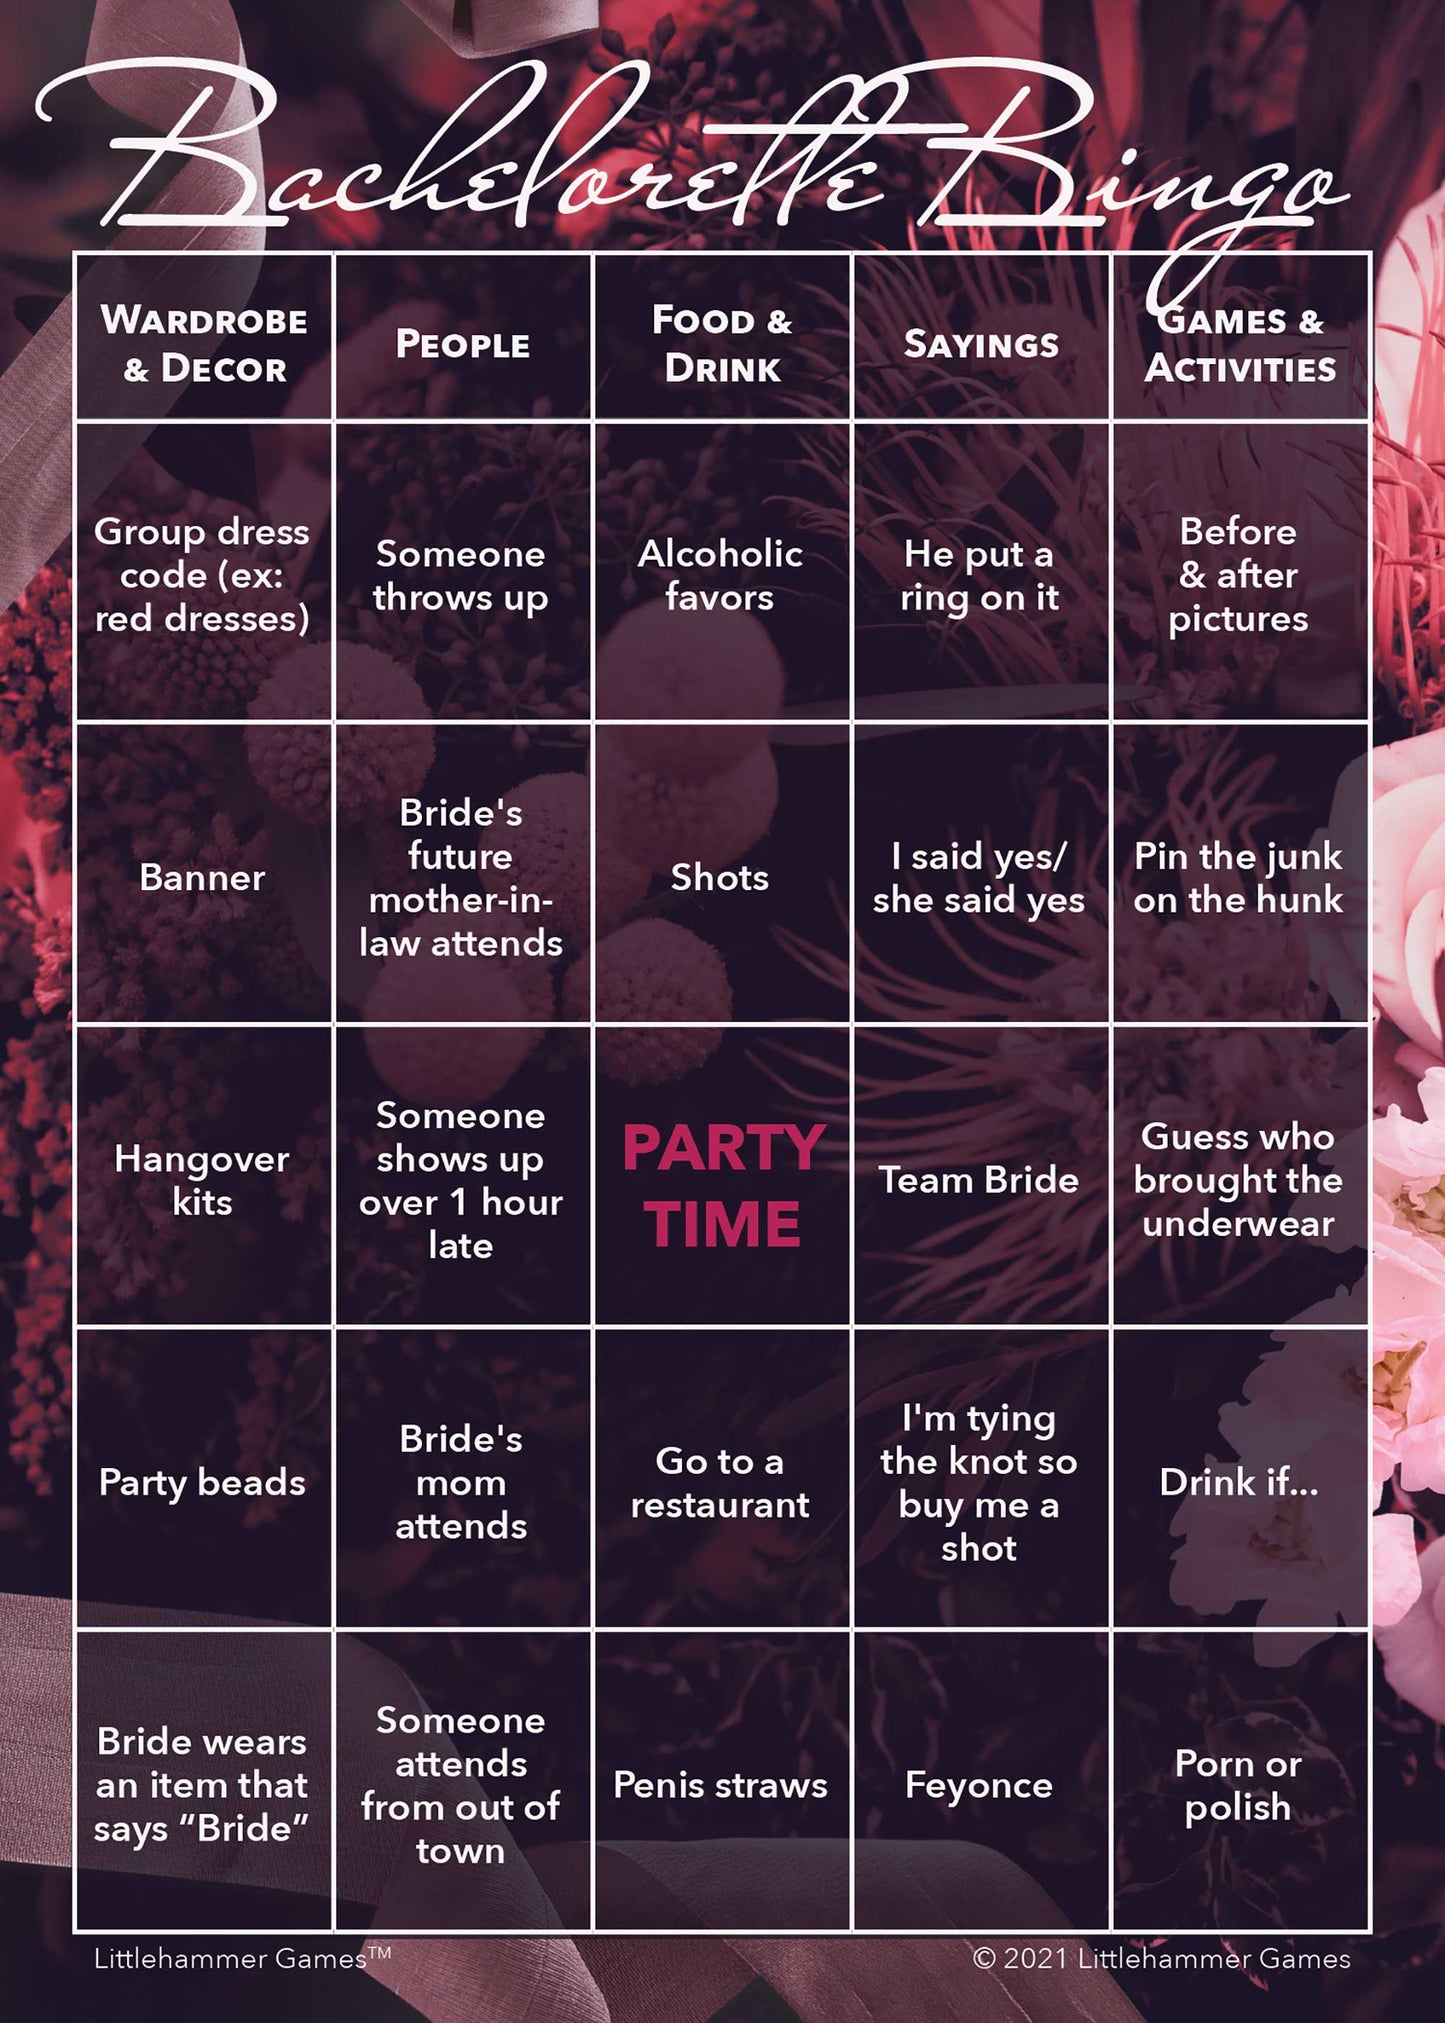 Bachelorette Bingo game card with white text on a dark floral background